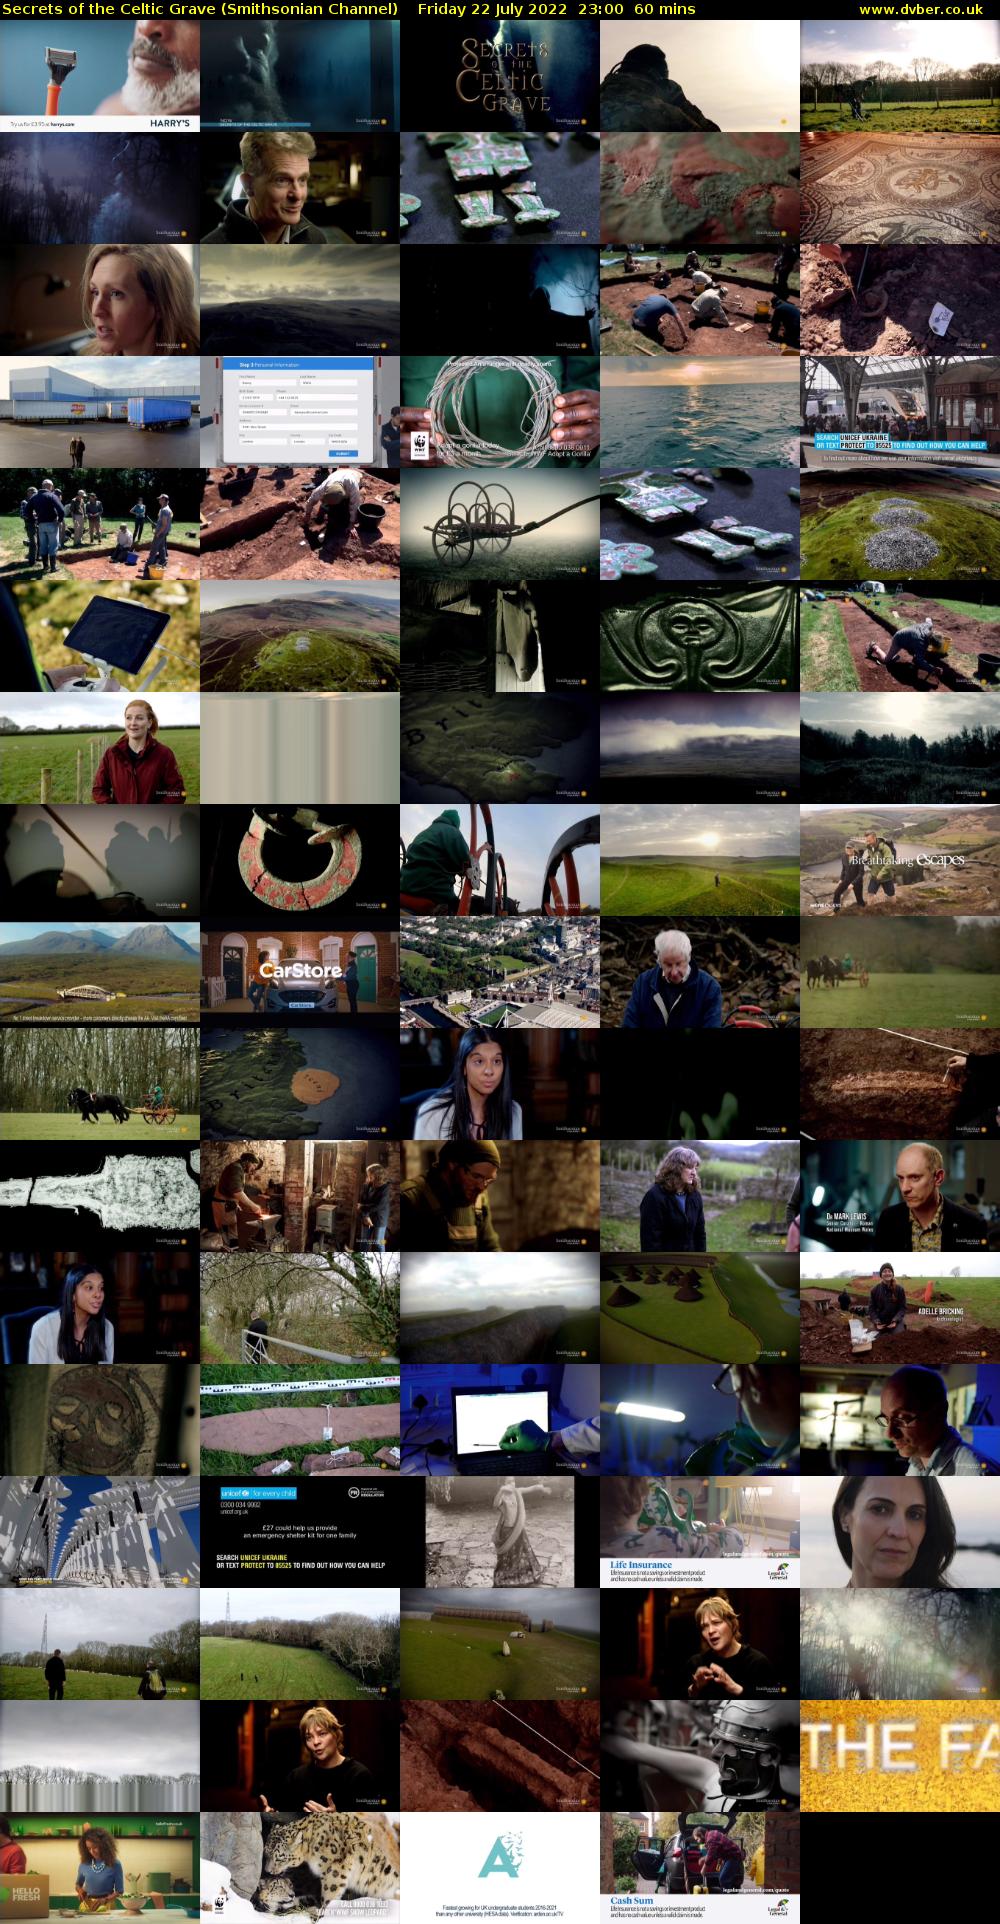 Secrets of the Celtic Grave (Smithsonian Channel) Friday 22 July 2022 23:00 - 00:00